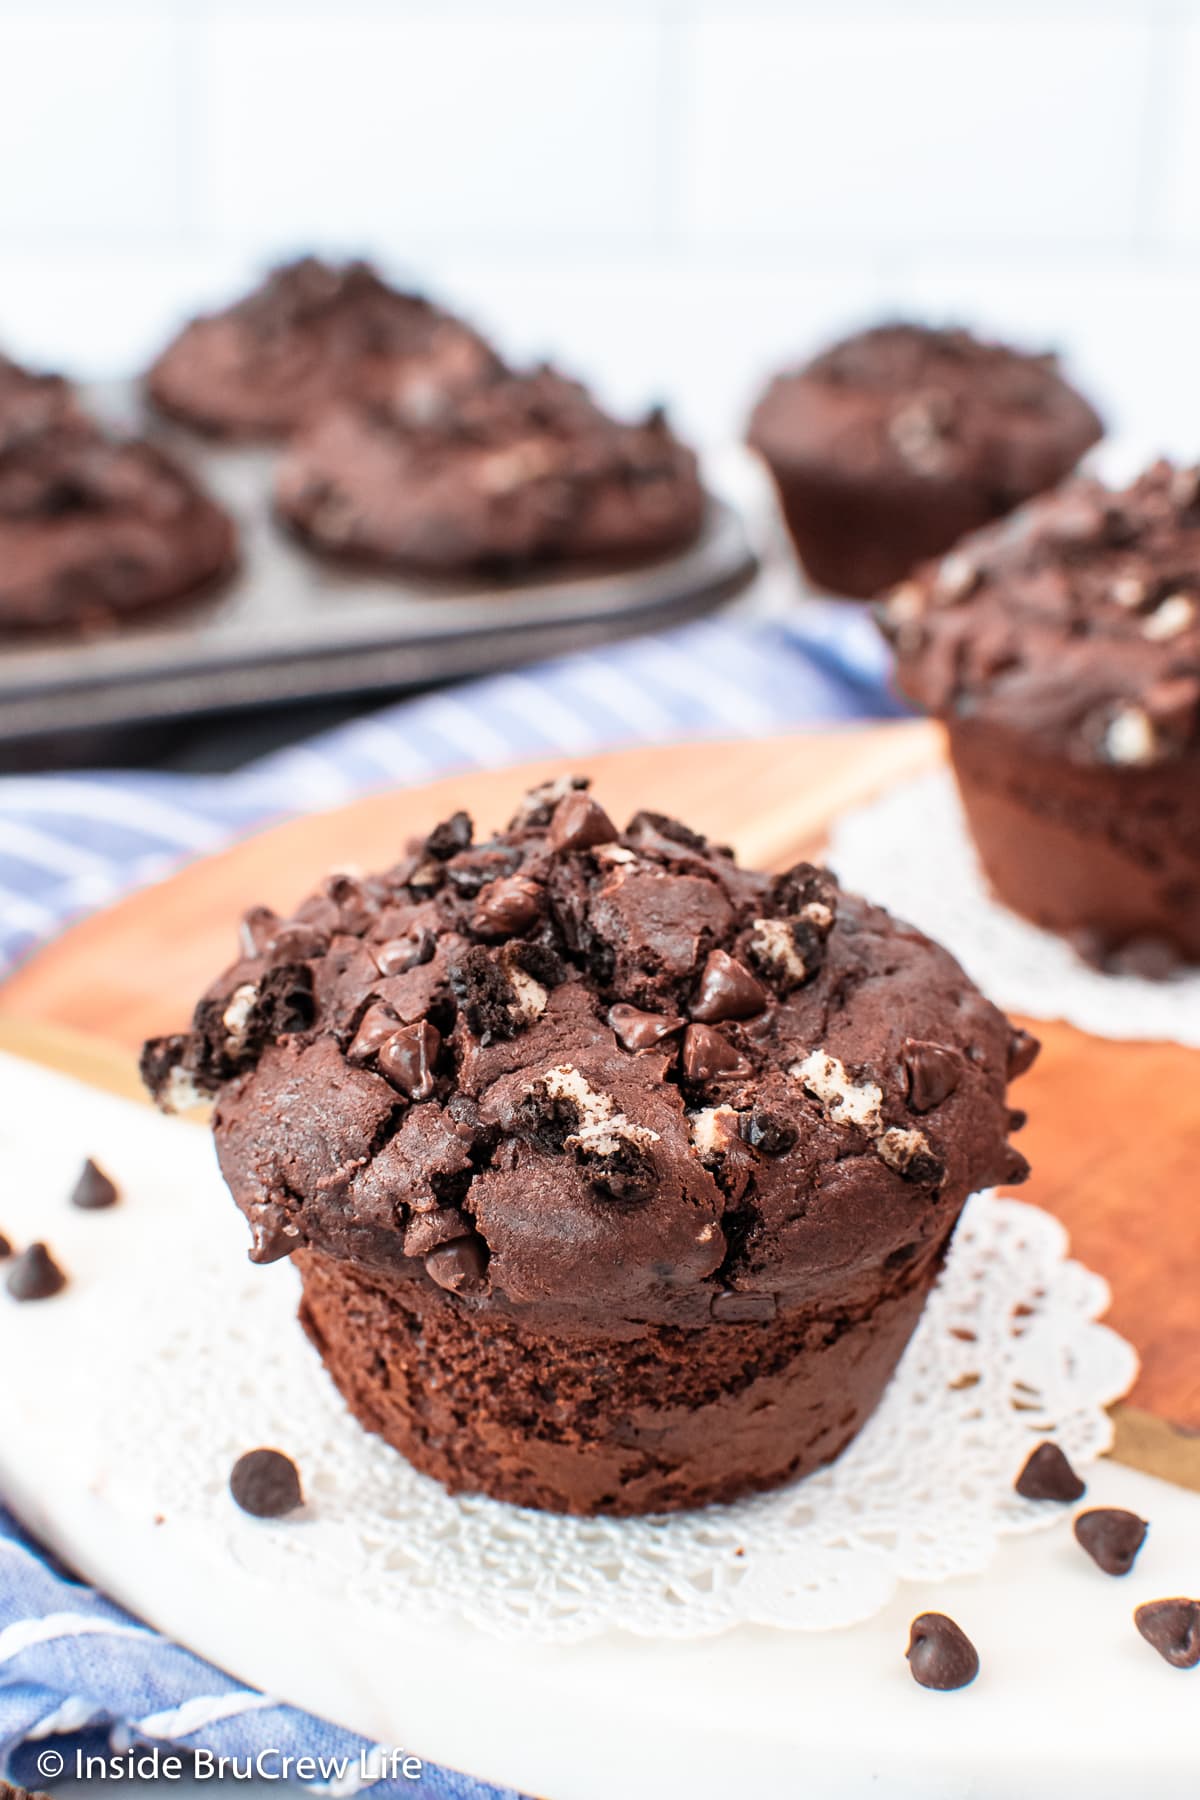 A dark chocolate muffin with cookies baked in it.